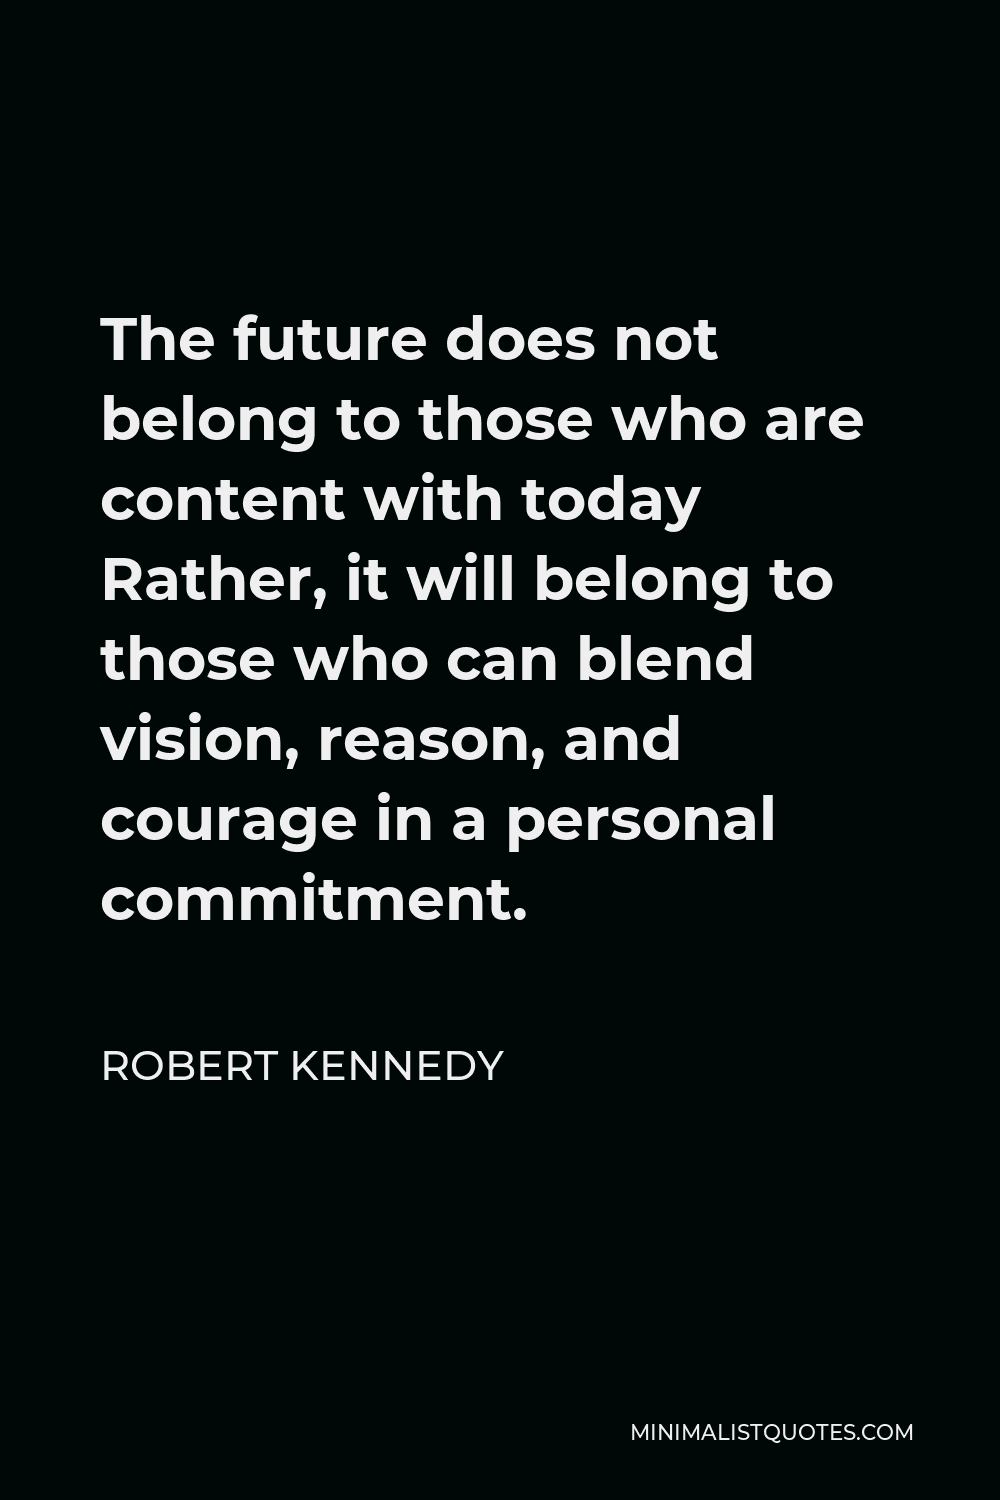 Robert Kennedy Quote - The future does not belong to those who are content with today Rather, it will belong to those who can blend vision, reason, and courage in a personal commitment.